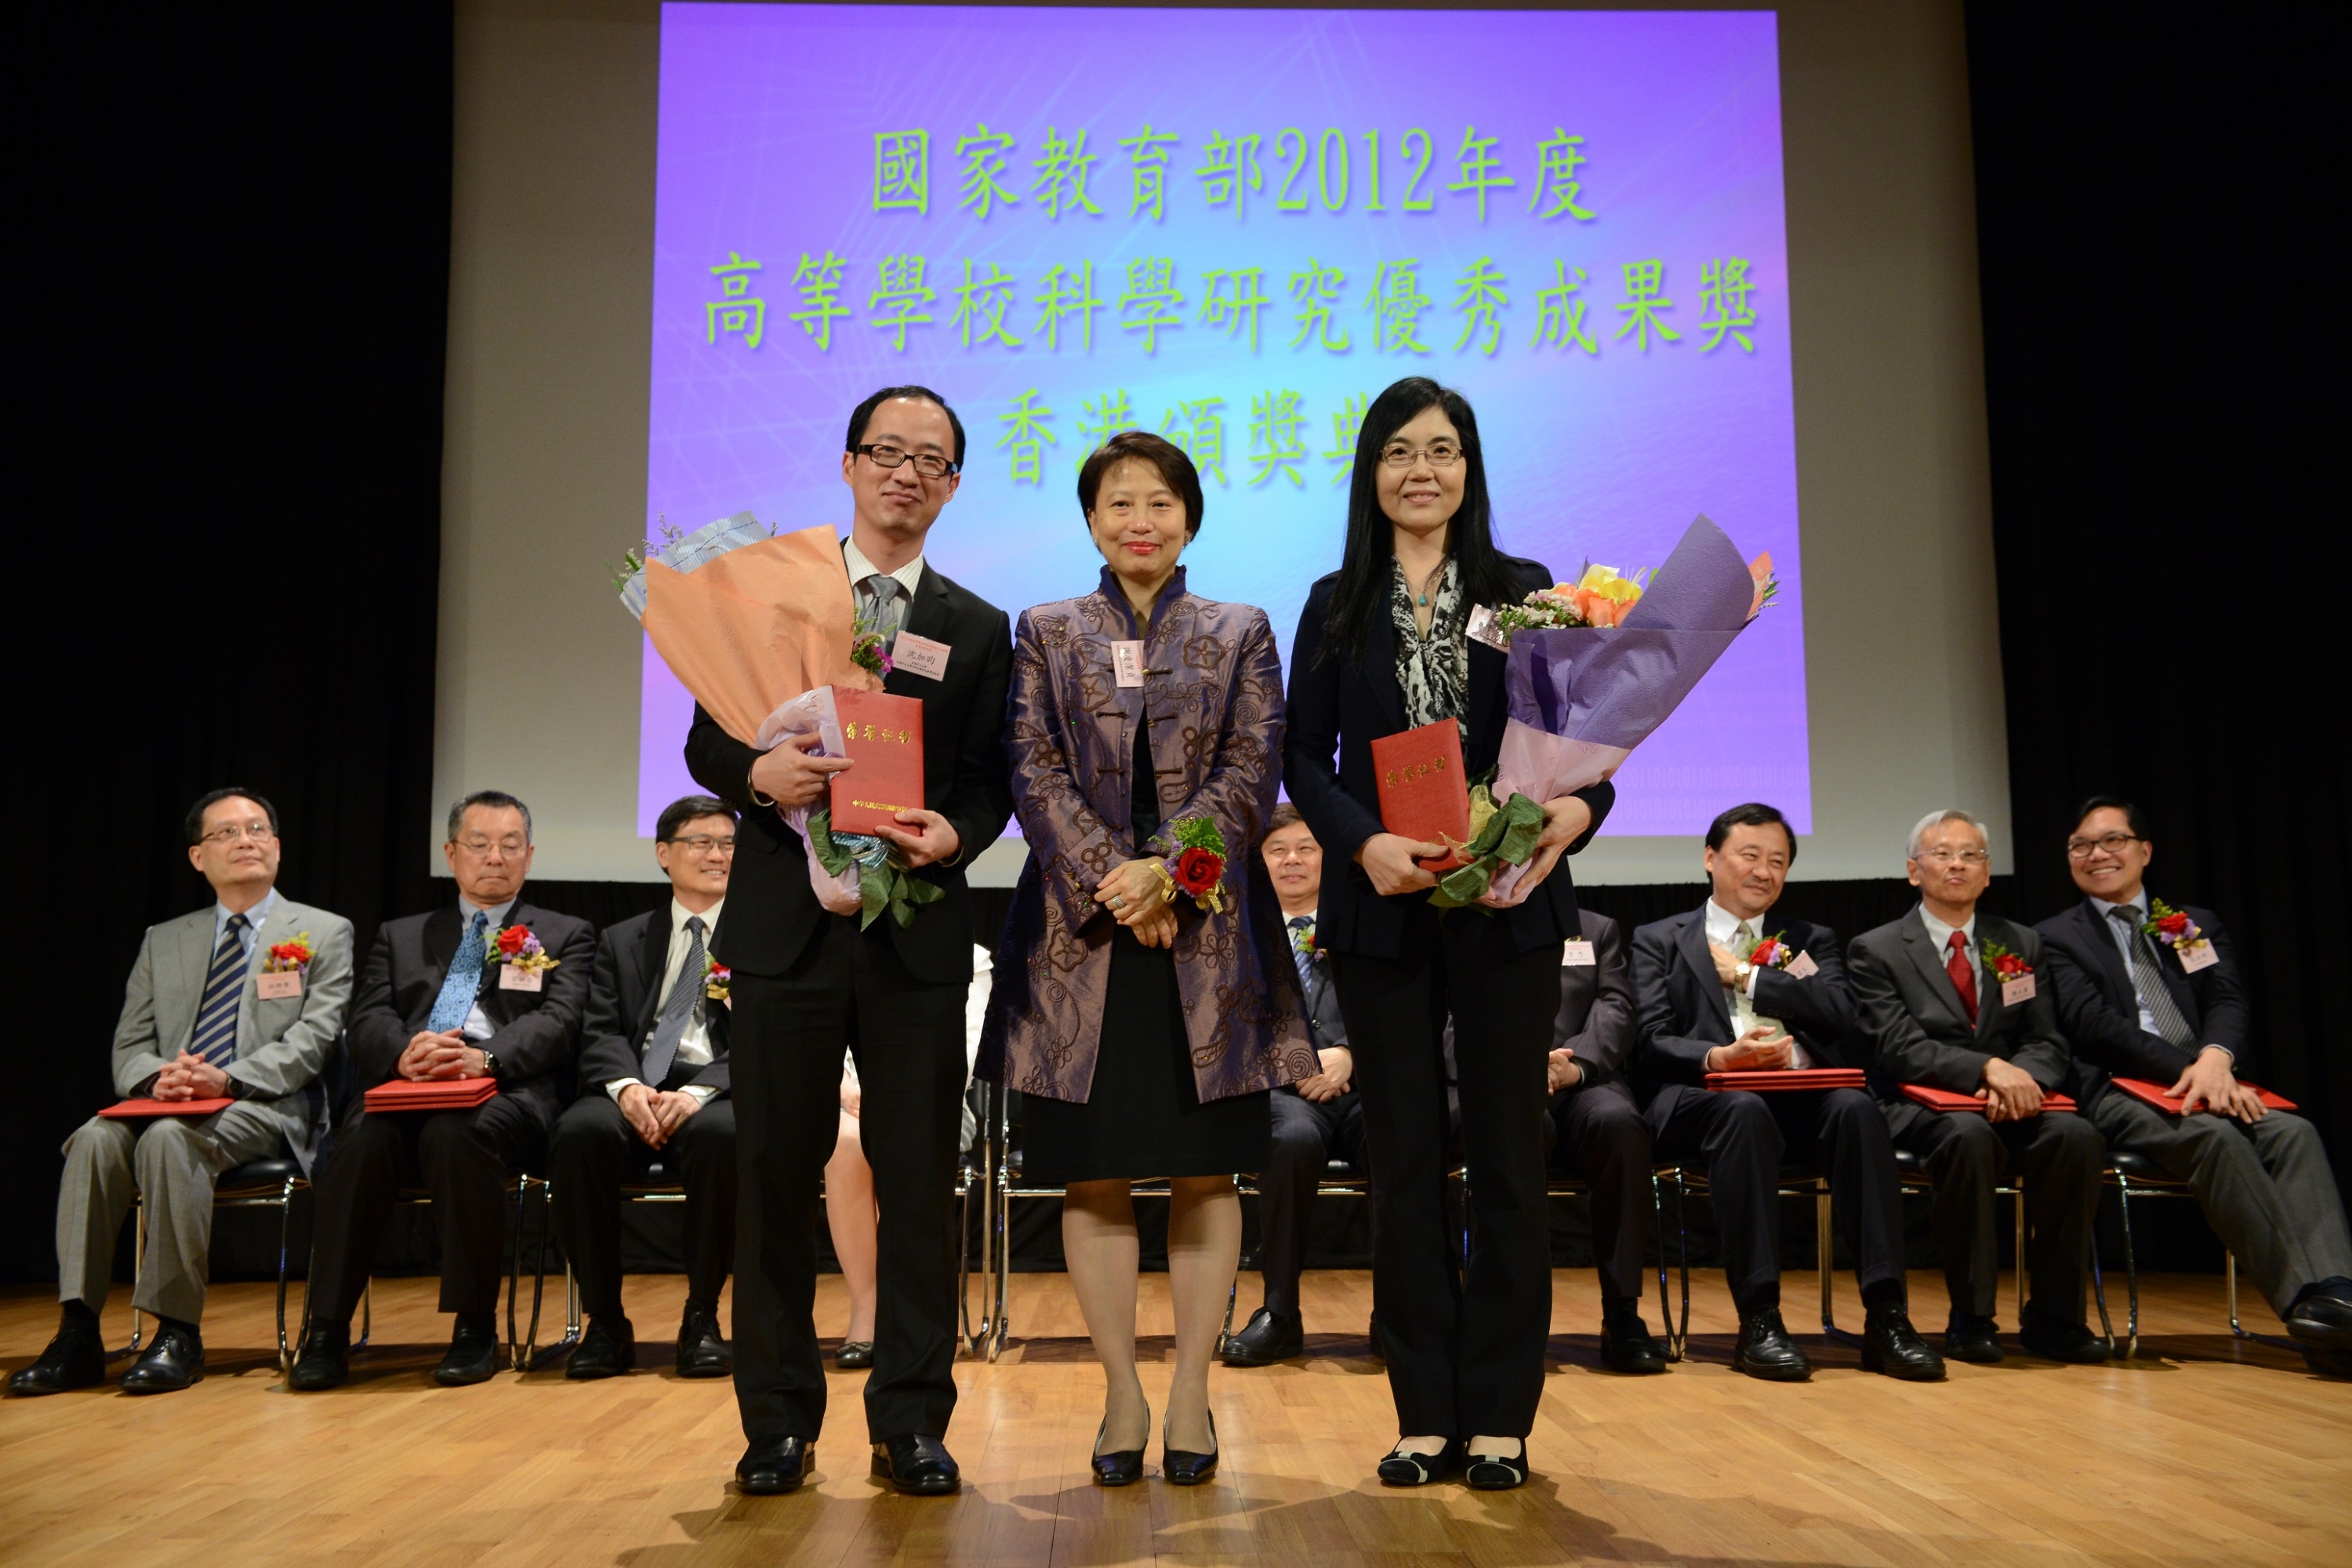 Professor Jun YU, Professor, and Mr. Jiayun SHEN, PhD student, Department of Medicine and Therapeutics, CUHK receive their award certificates from Mrs. Cherry TSE LING Kit-ching